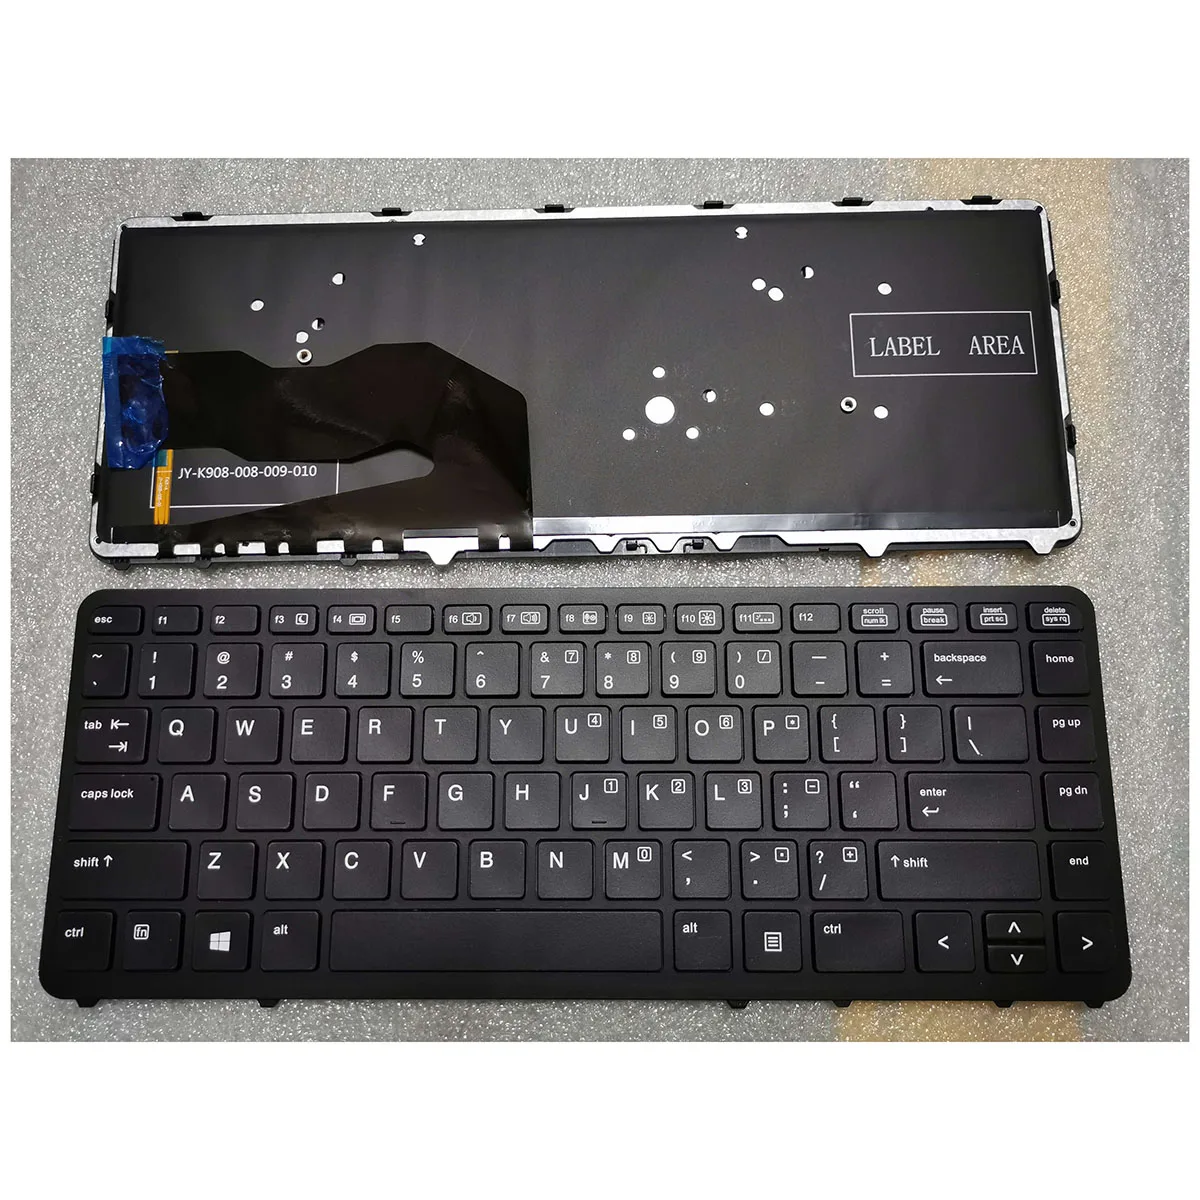 

new English 840 G1 KEYBOARD For HP 840 G1 US 850 G1 840 G2 850 G2 ZBook 14 black Laptop Keyboard tested 100% work